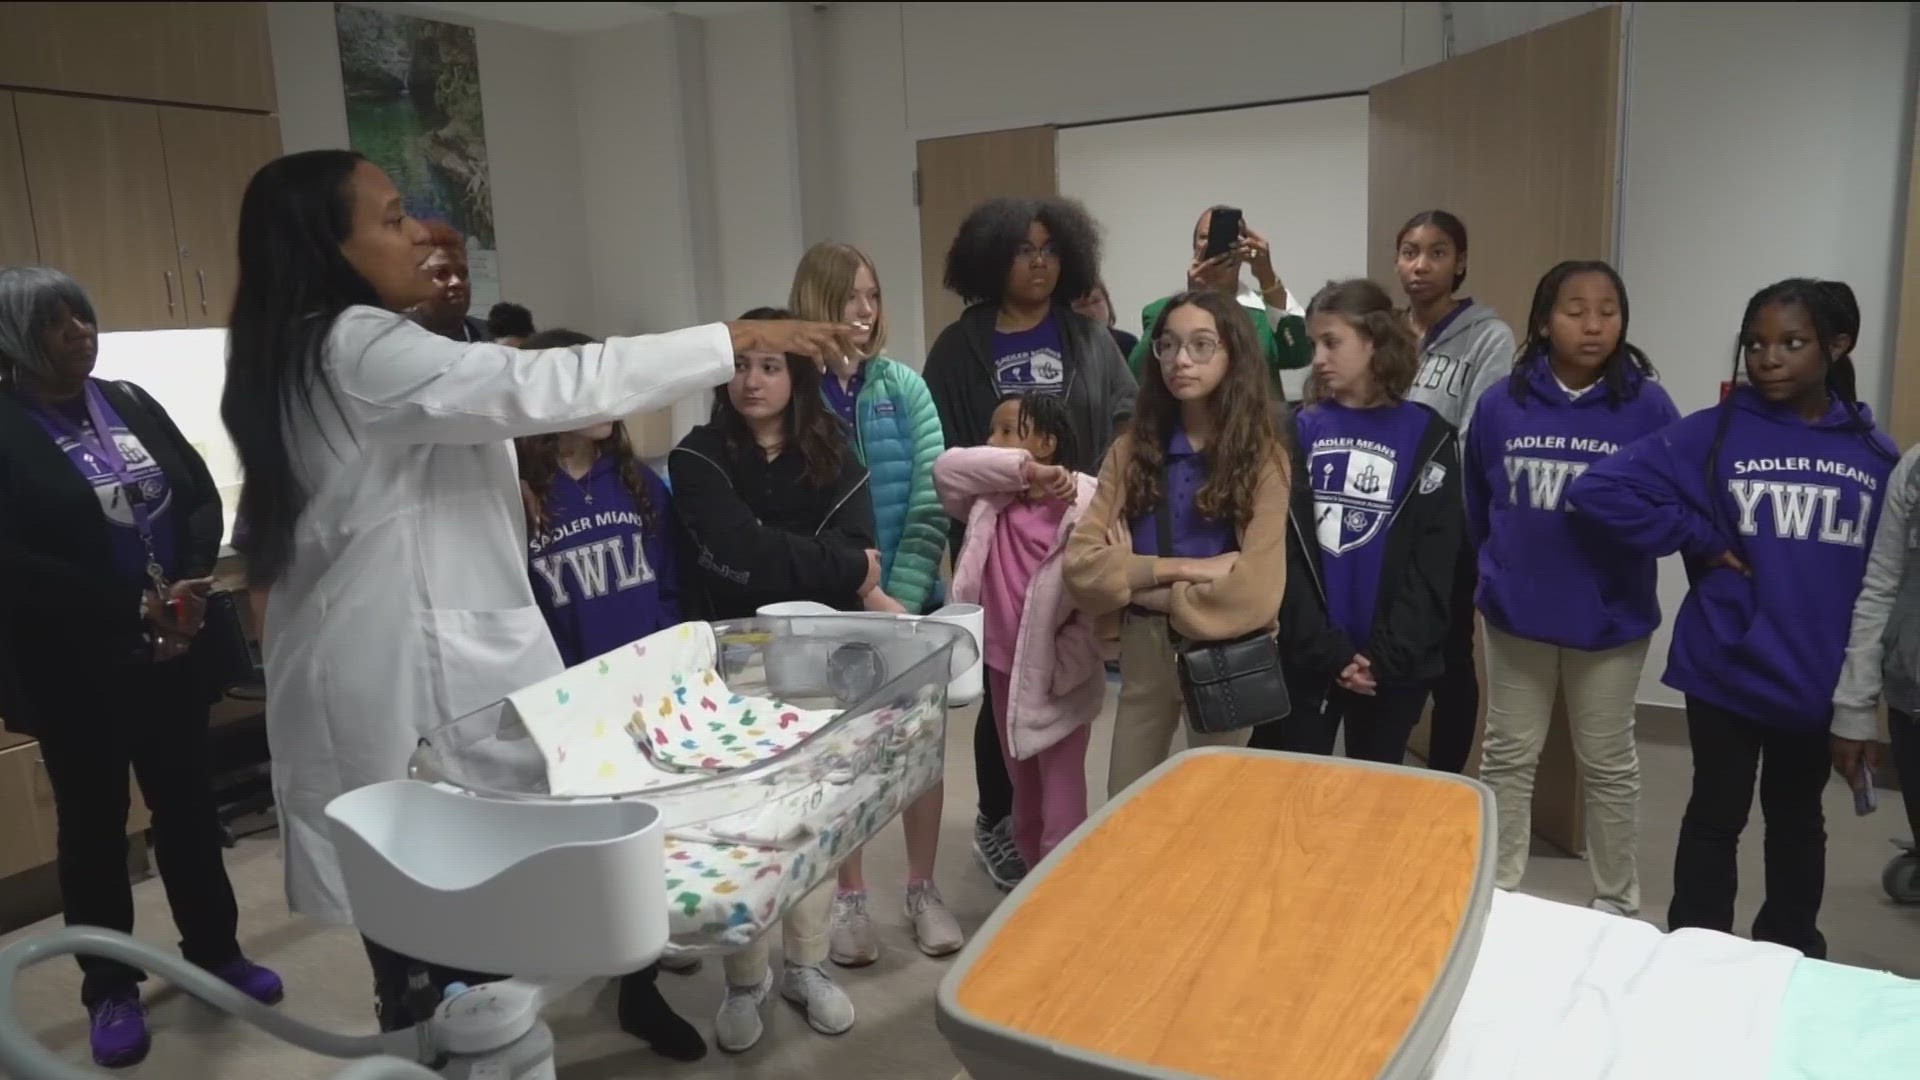 Students at an Austin school got a first-hand look at one of Texas's newest hospitals. Texas Children's opened its doors for the group.